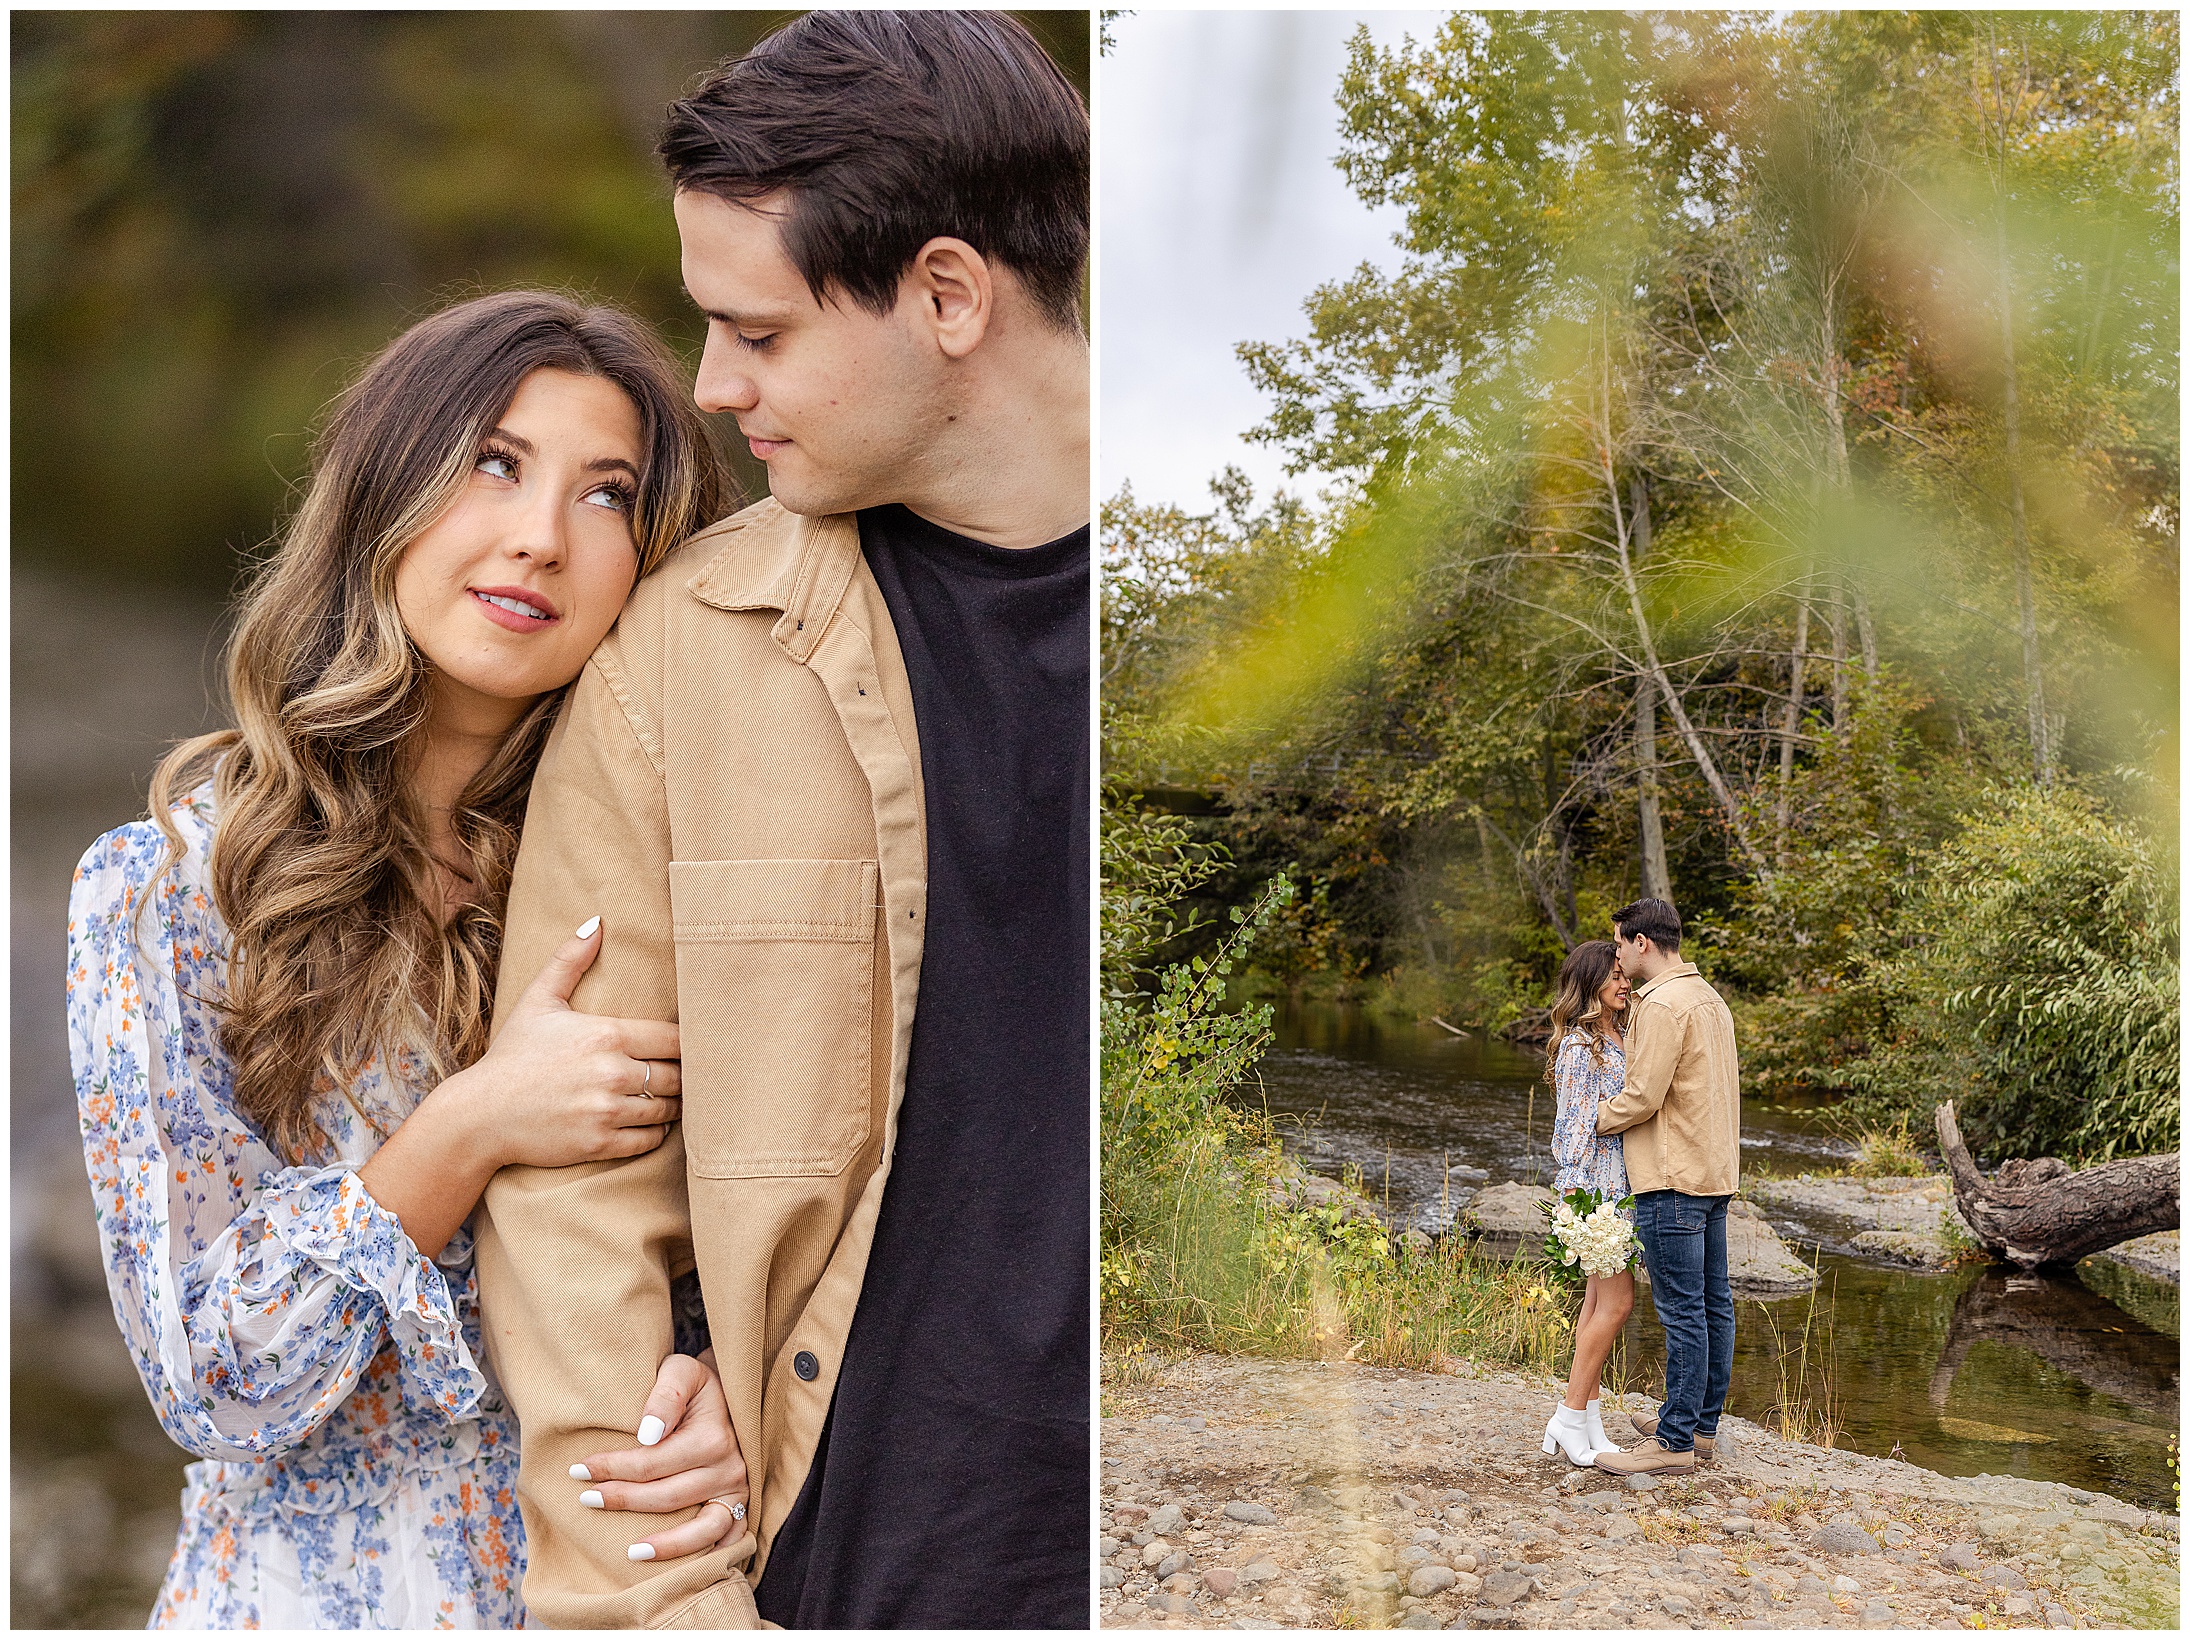 Creekside Bidwell Park Golf Course Engagement Session Floral Bouquet Champagne Roses Green Dress,